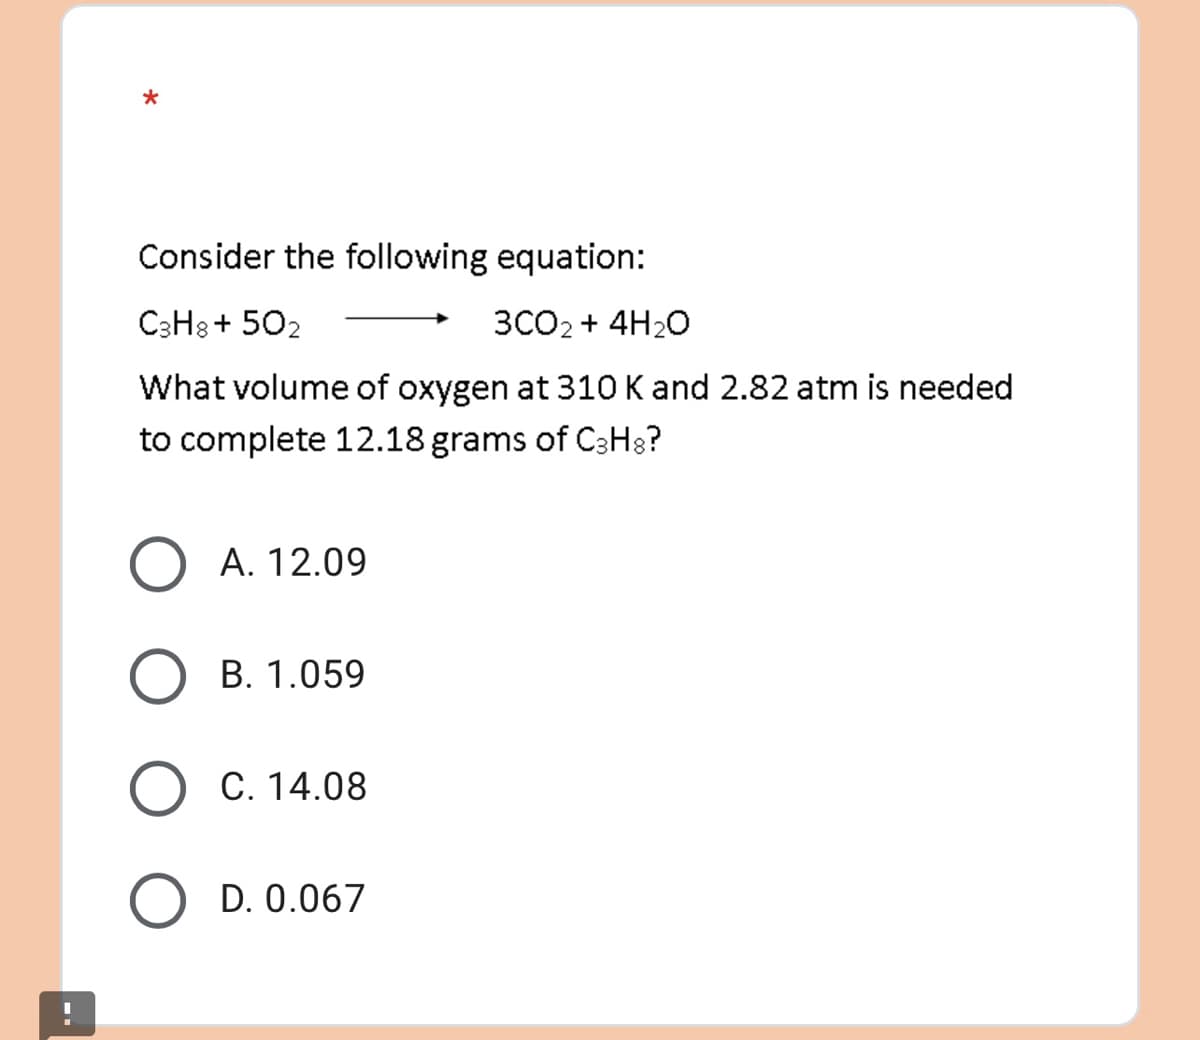 *
Consider the following equation:
C3H8+502
3CO2 + 4H₂O
What volume of oxygen at 310 K and 2.82 atm is needed
to complete 12.18 grams of C3H8?
O A. 12.09
B. 1.059
O C. 14.08
O D. 0.067